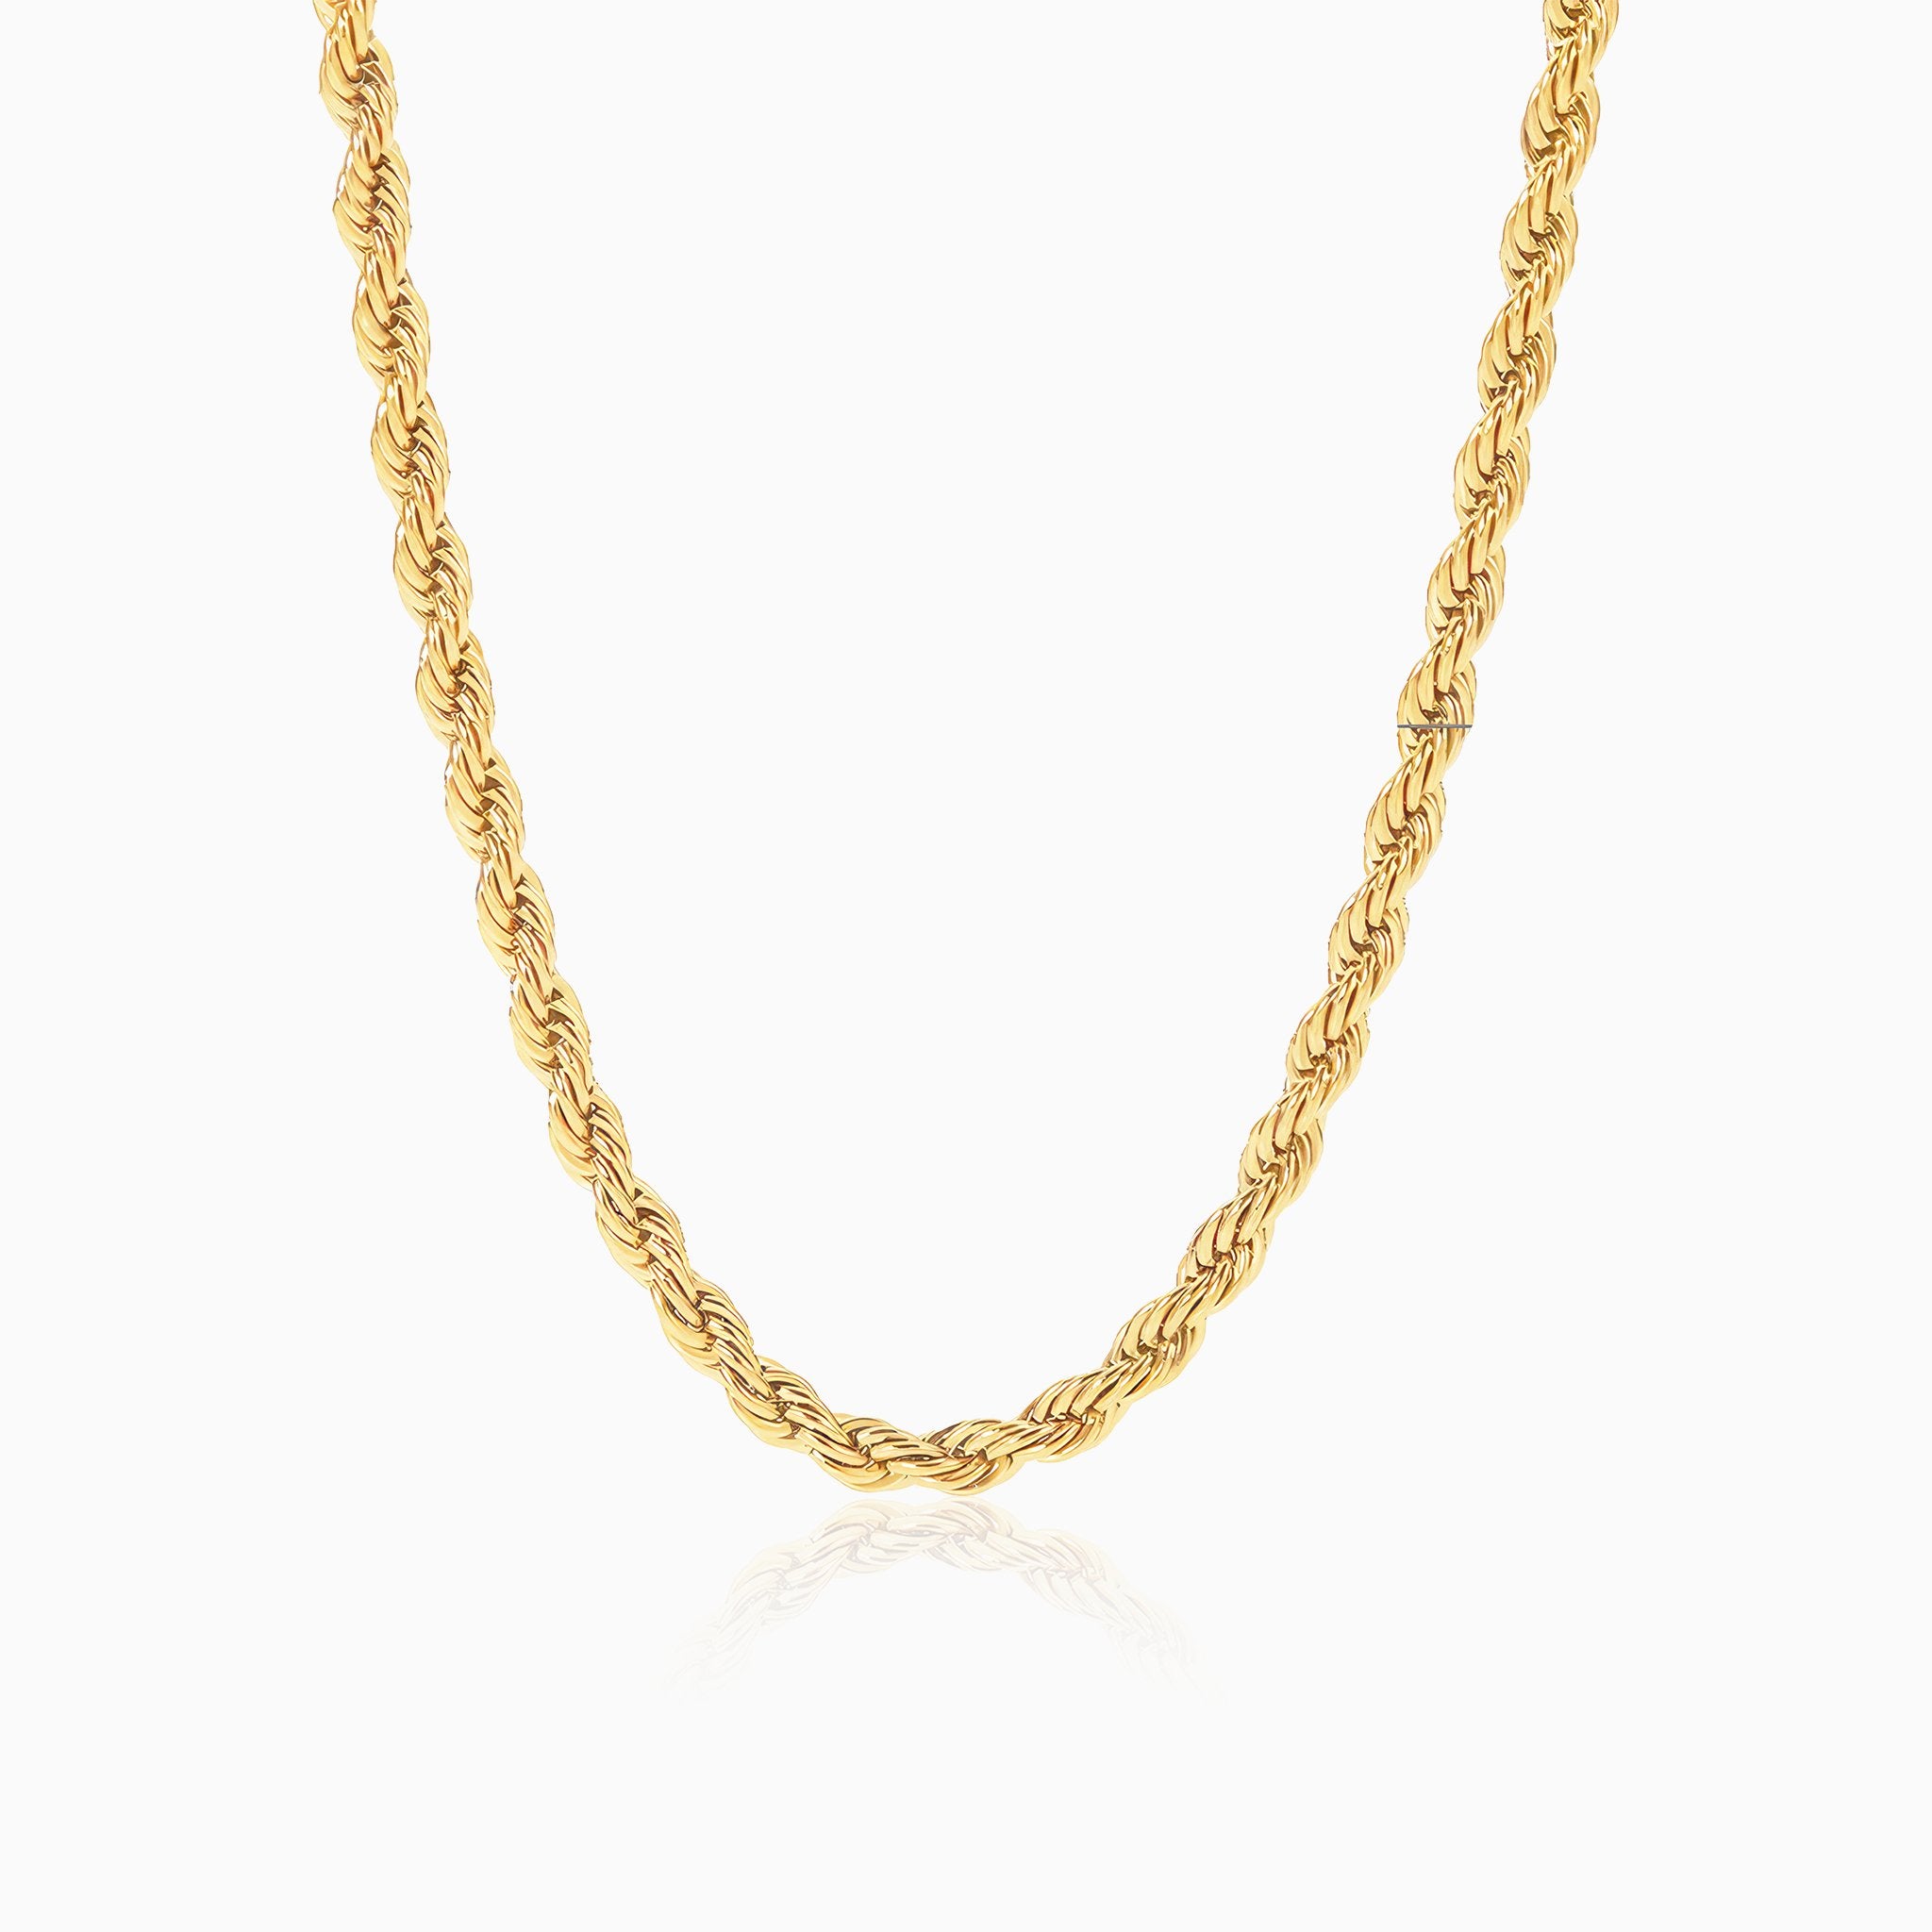 Twist Design Necklace - Nobbier - Necklace - 18K Gold And Titanium PVD Coated Jewelry